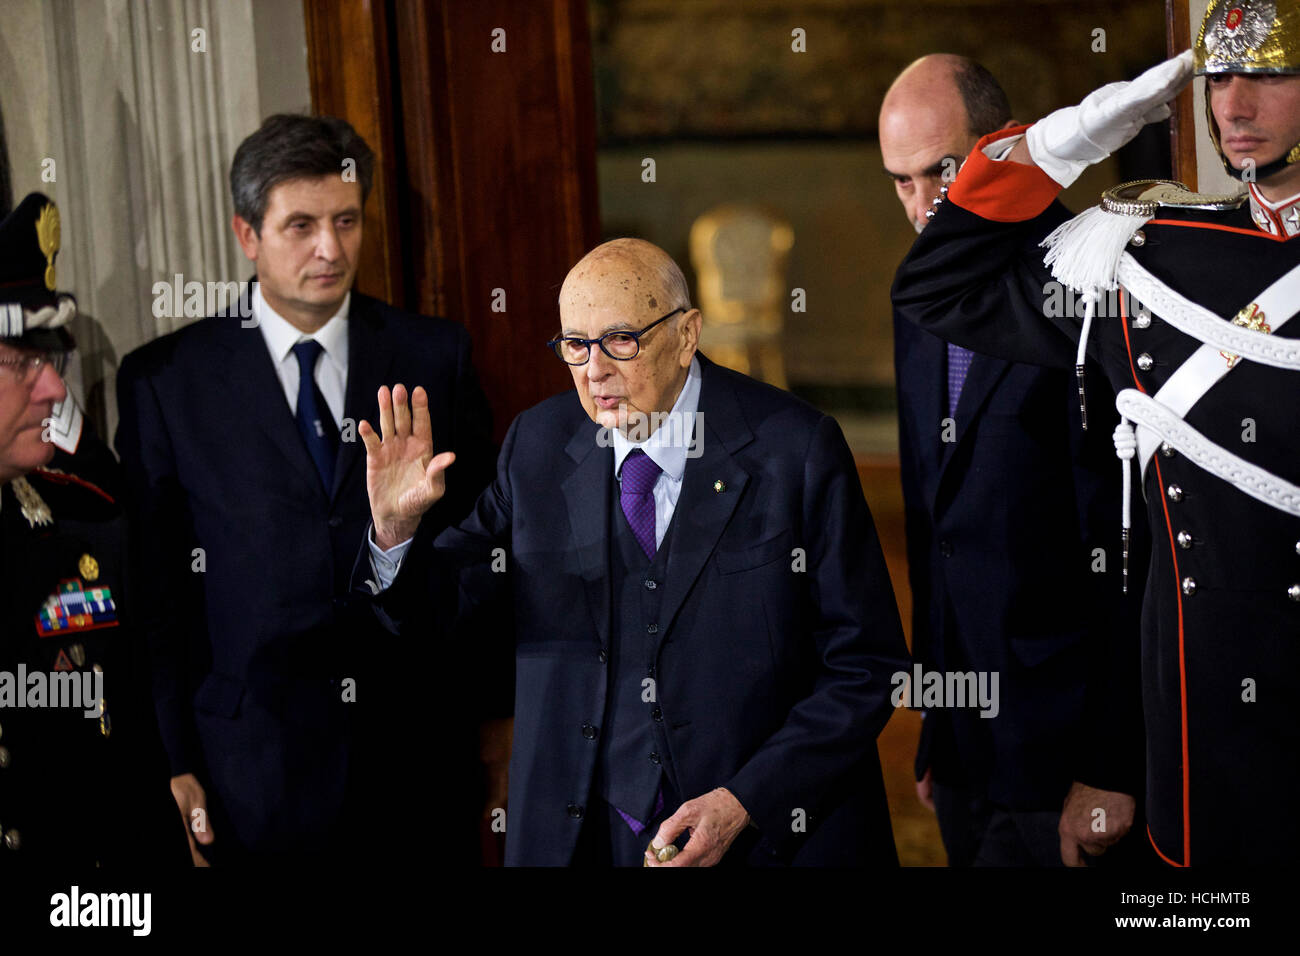 Rome, Italy. 8th Dec, 2016. Italian former President and senator Giorgio Napolitano (C) leaves at the end of the first day of consultations with Italian President Sergio Mattarella at the Quirinale Palace in Rome, Italy, Dec. 8, 2016. Italian Prime Minister Matteo Renzi formally handed in his resignation to Mattarella after the country's 2017 budget was approved in Senate. The resignation now opened the way for the president to launch a round of talks with all party leaders in order to name a new prime minister, and form a transition government. © Jin Yu/Xinhua/Alamy Live News Stock Photo